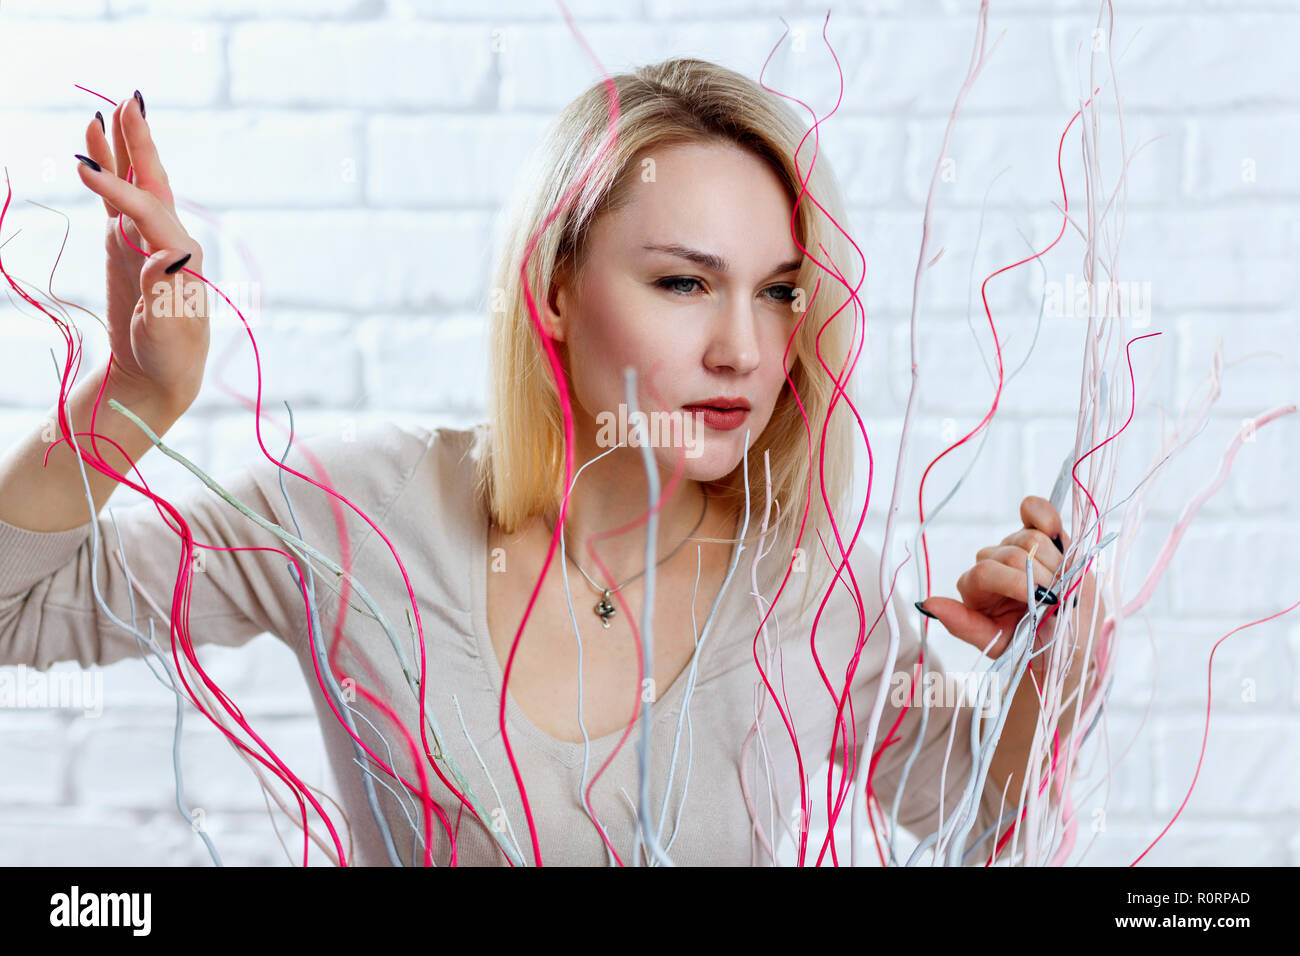 Woman with suspicious sight looking out over decoration in studio. Stock Photo